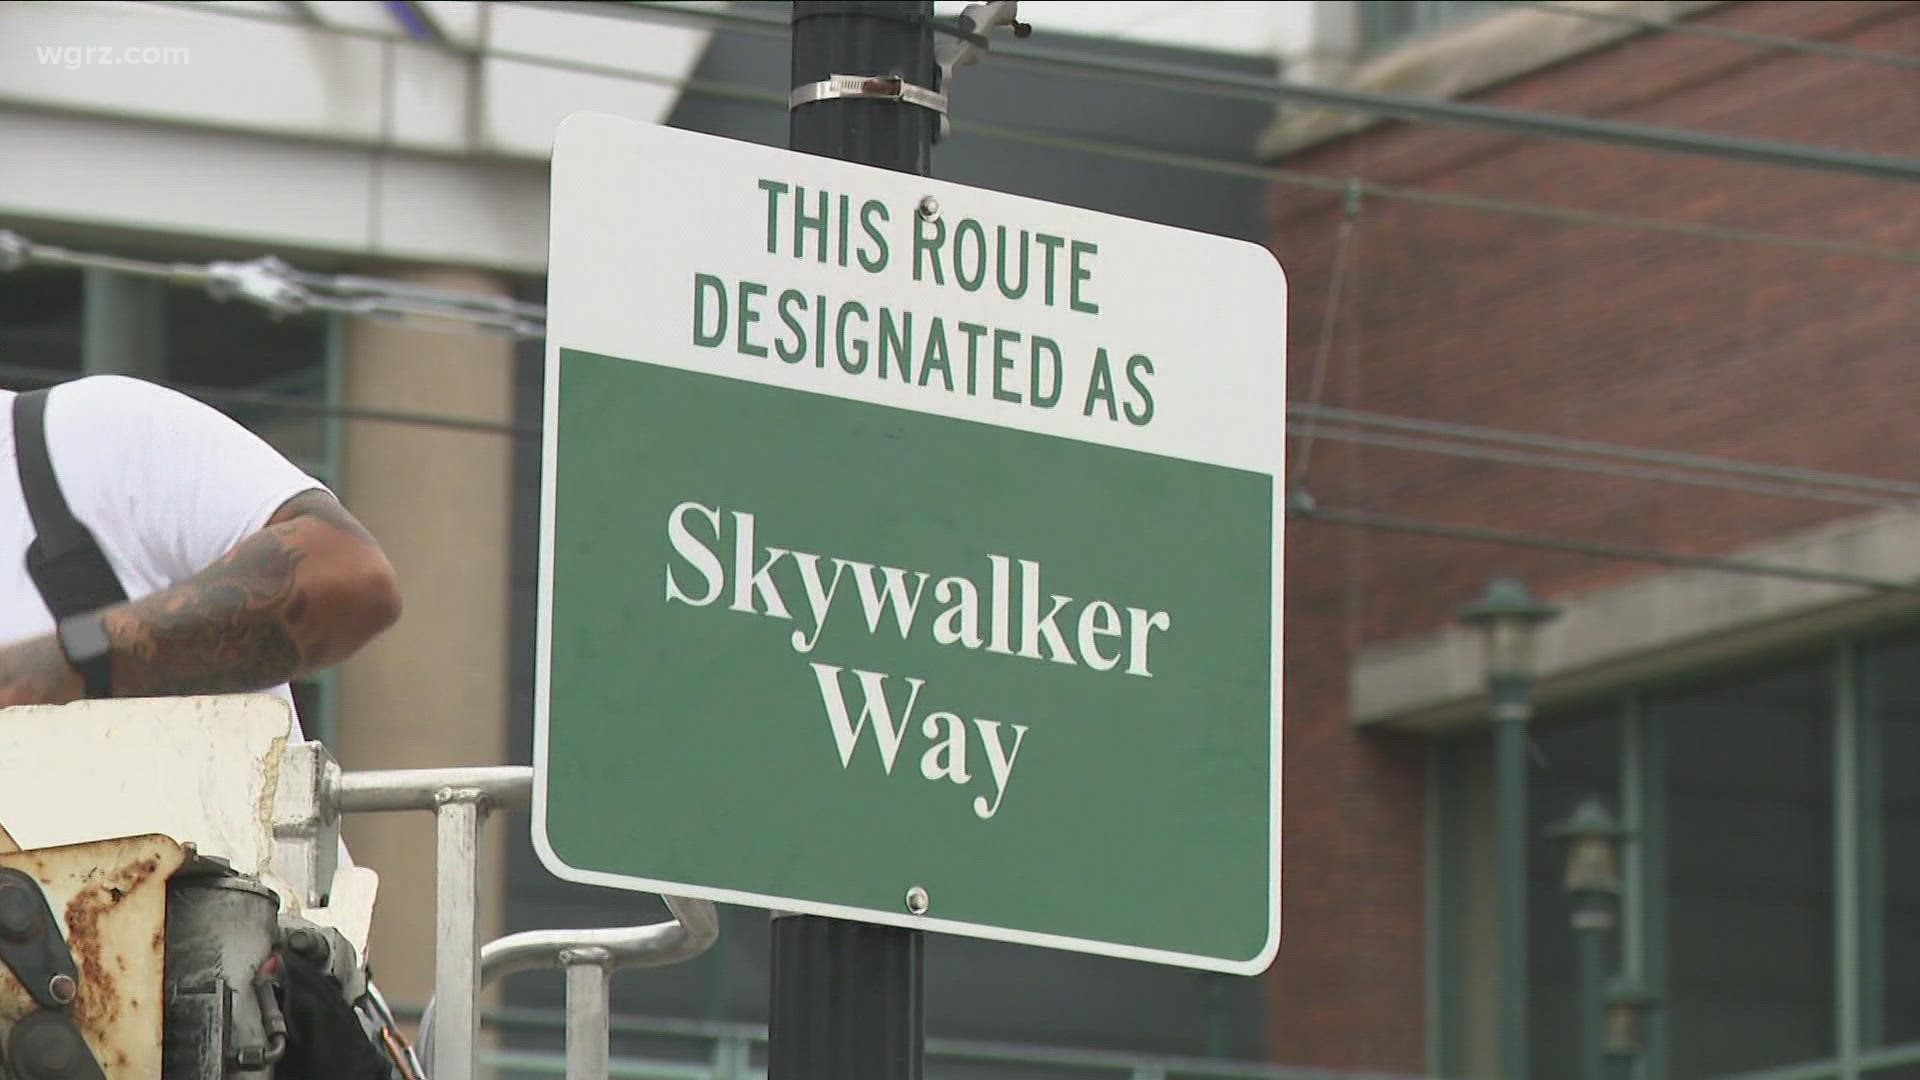 A multiyear effort led by three sisters whose father died during construction of The Skyway culminated in a ceremony and signage.